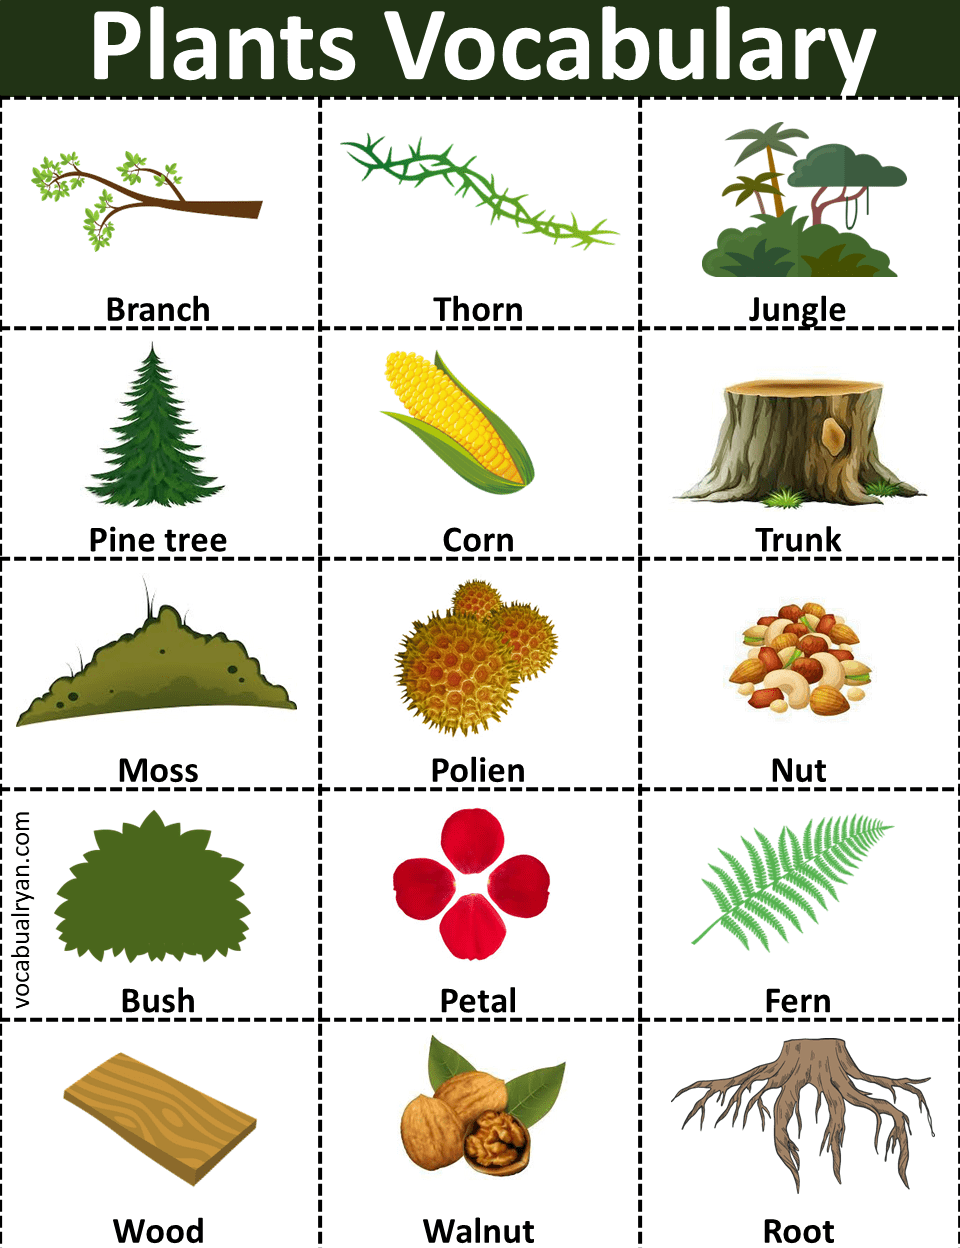 20 plants name in English